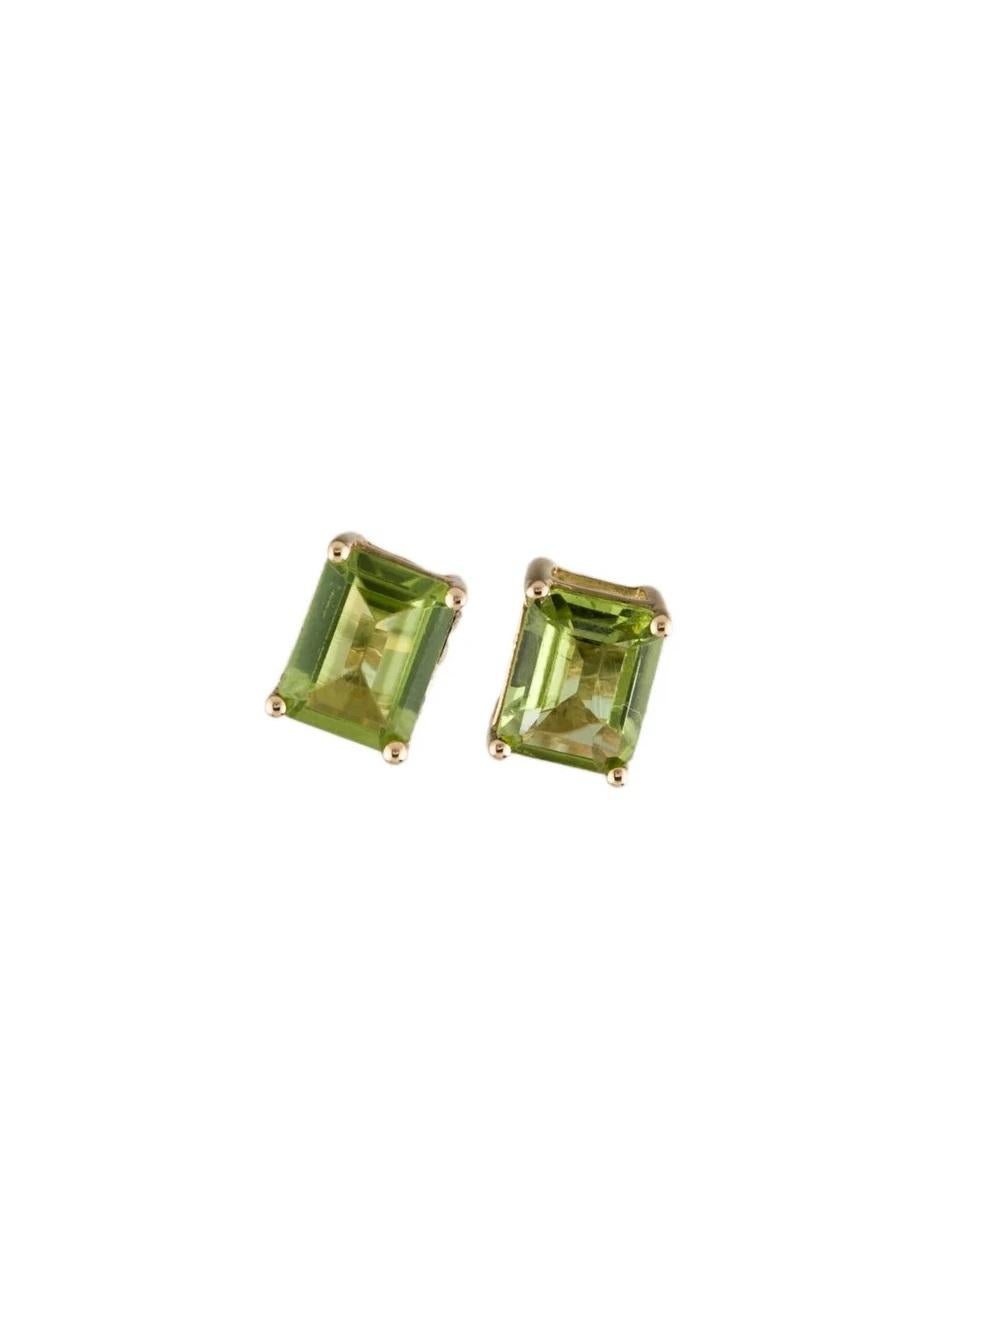 14K Yellow Gold Peridot Stud Earrings 2.74ct Rectangular Step Cut - Jewelry In New Condition For Sale In Holtsville, NY